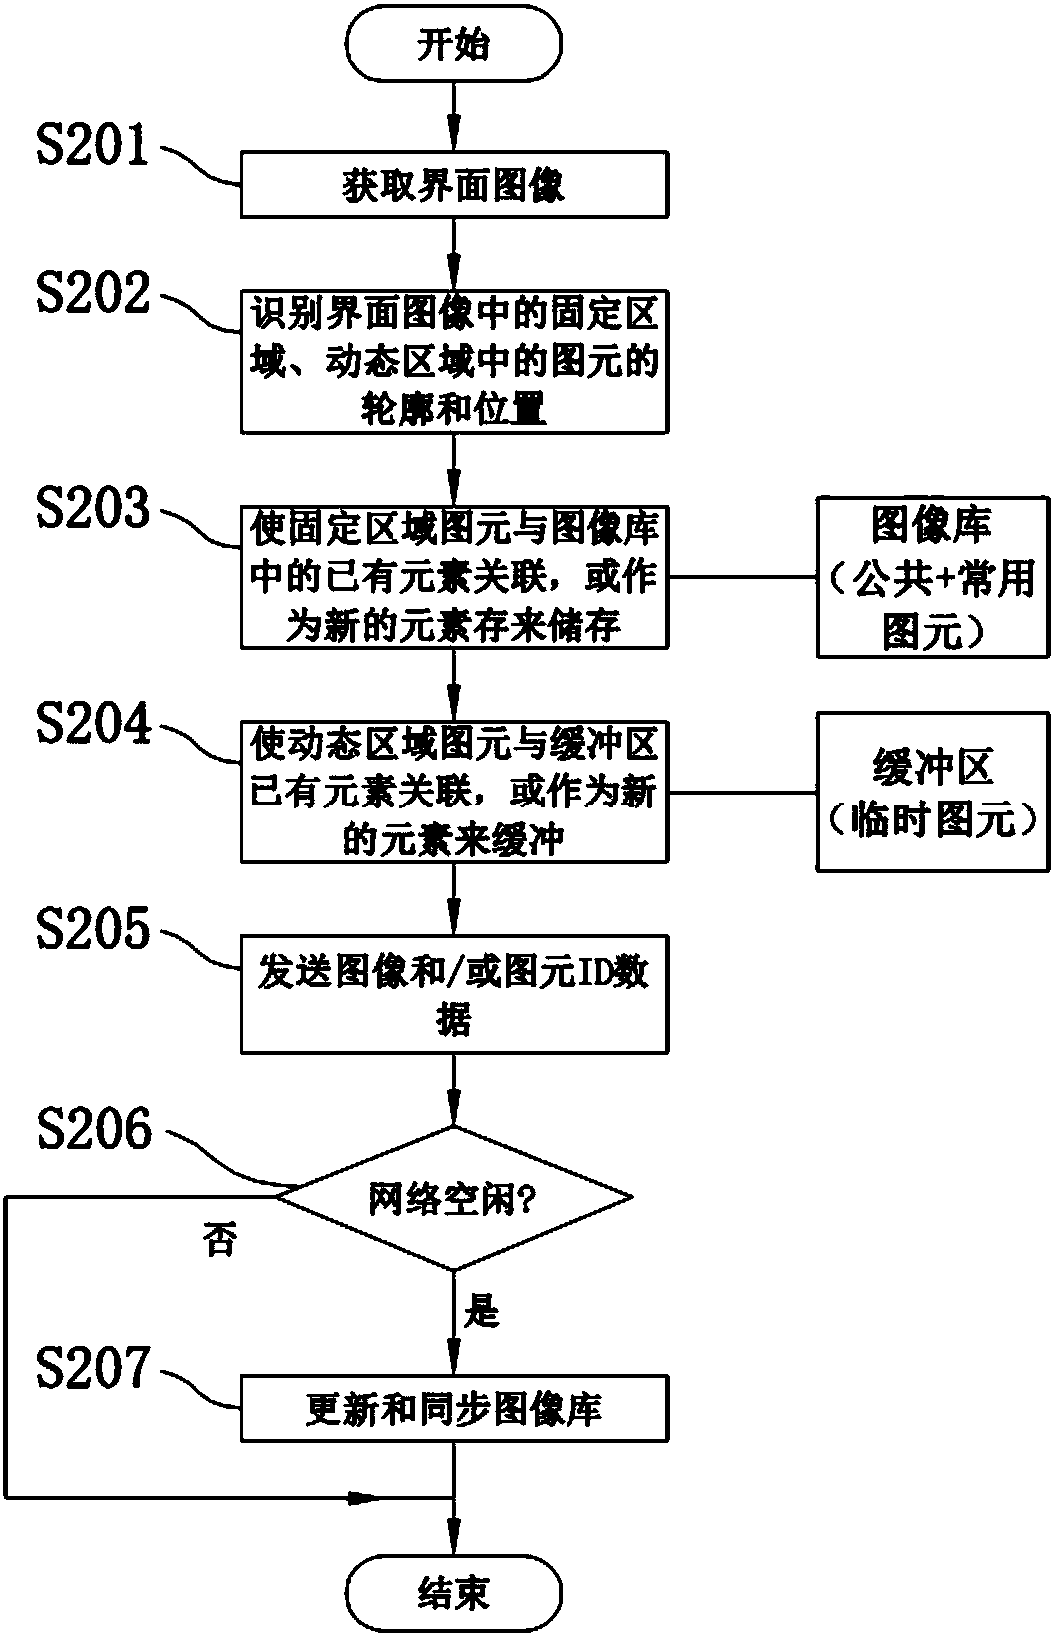 Quick interface interaction method and device for remote operation